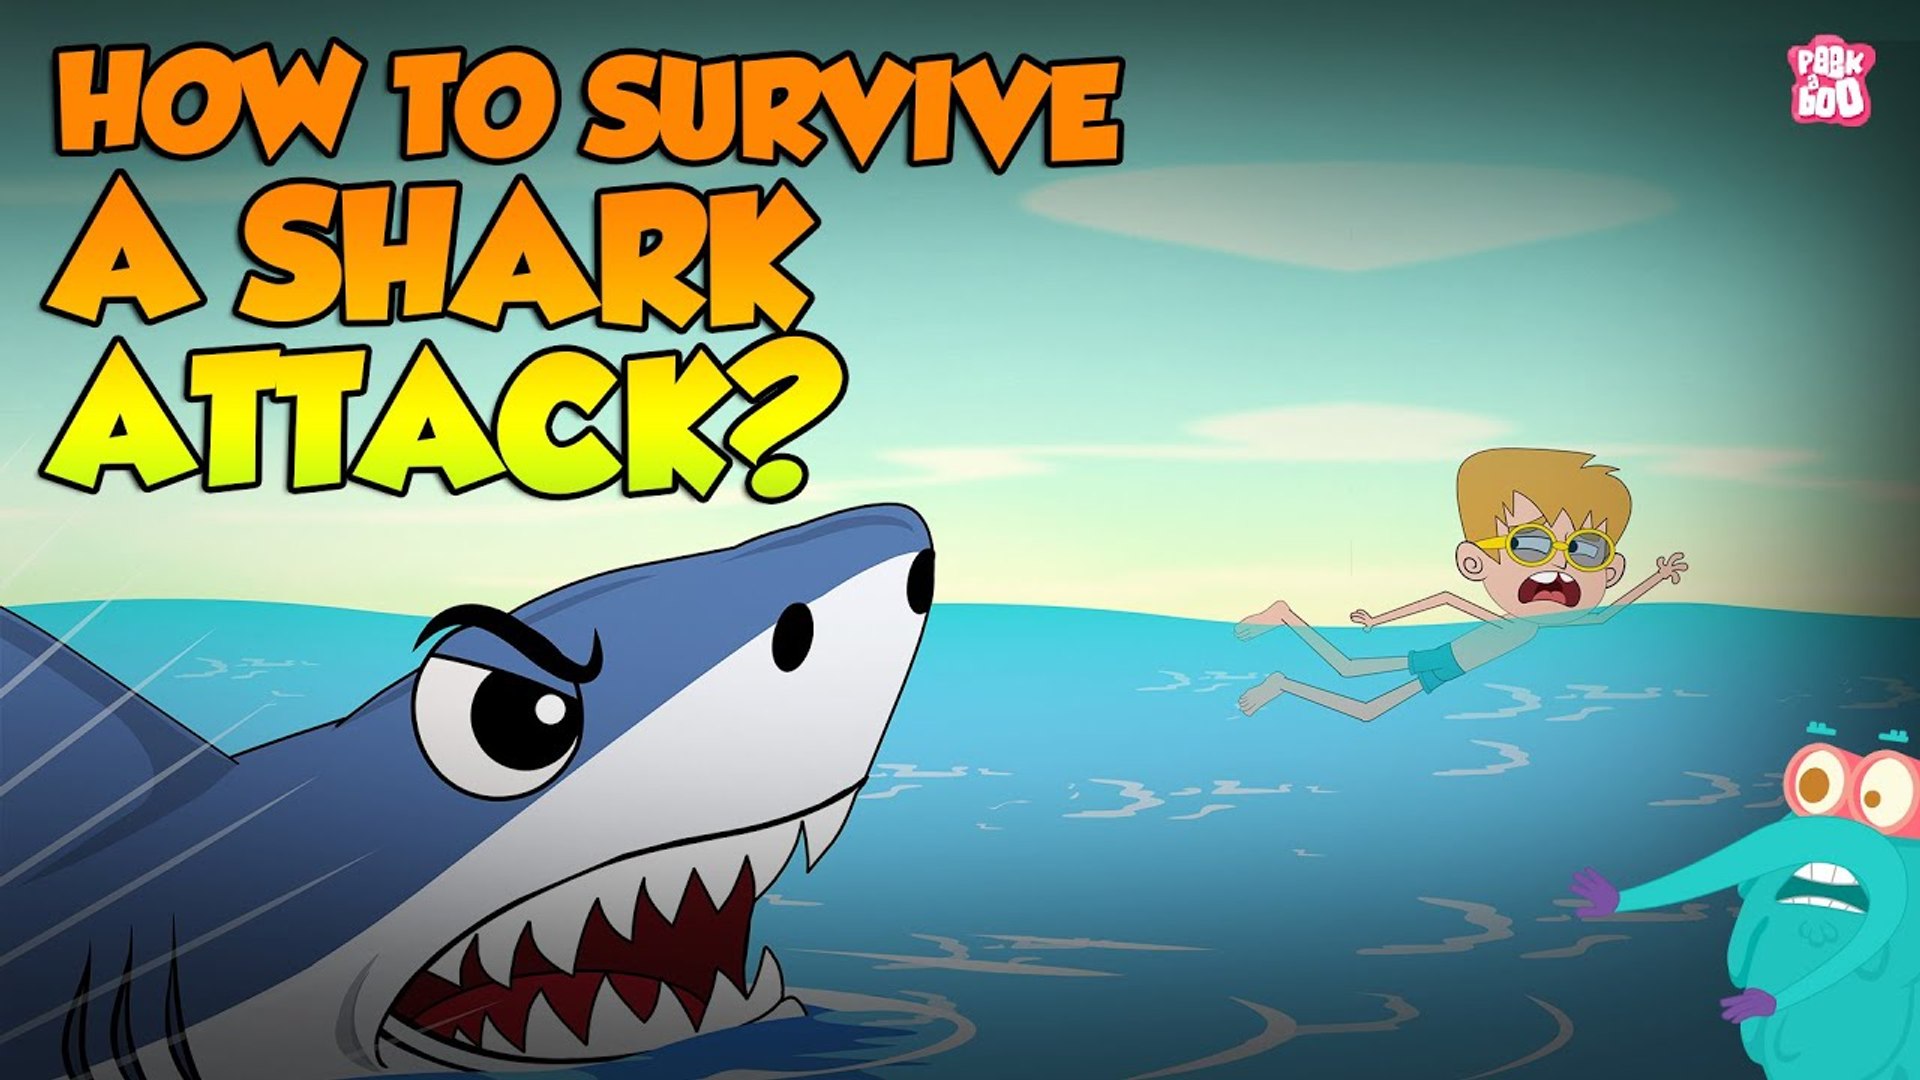 How to survive a shark attack